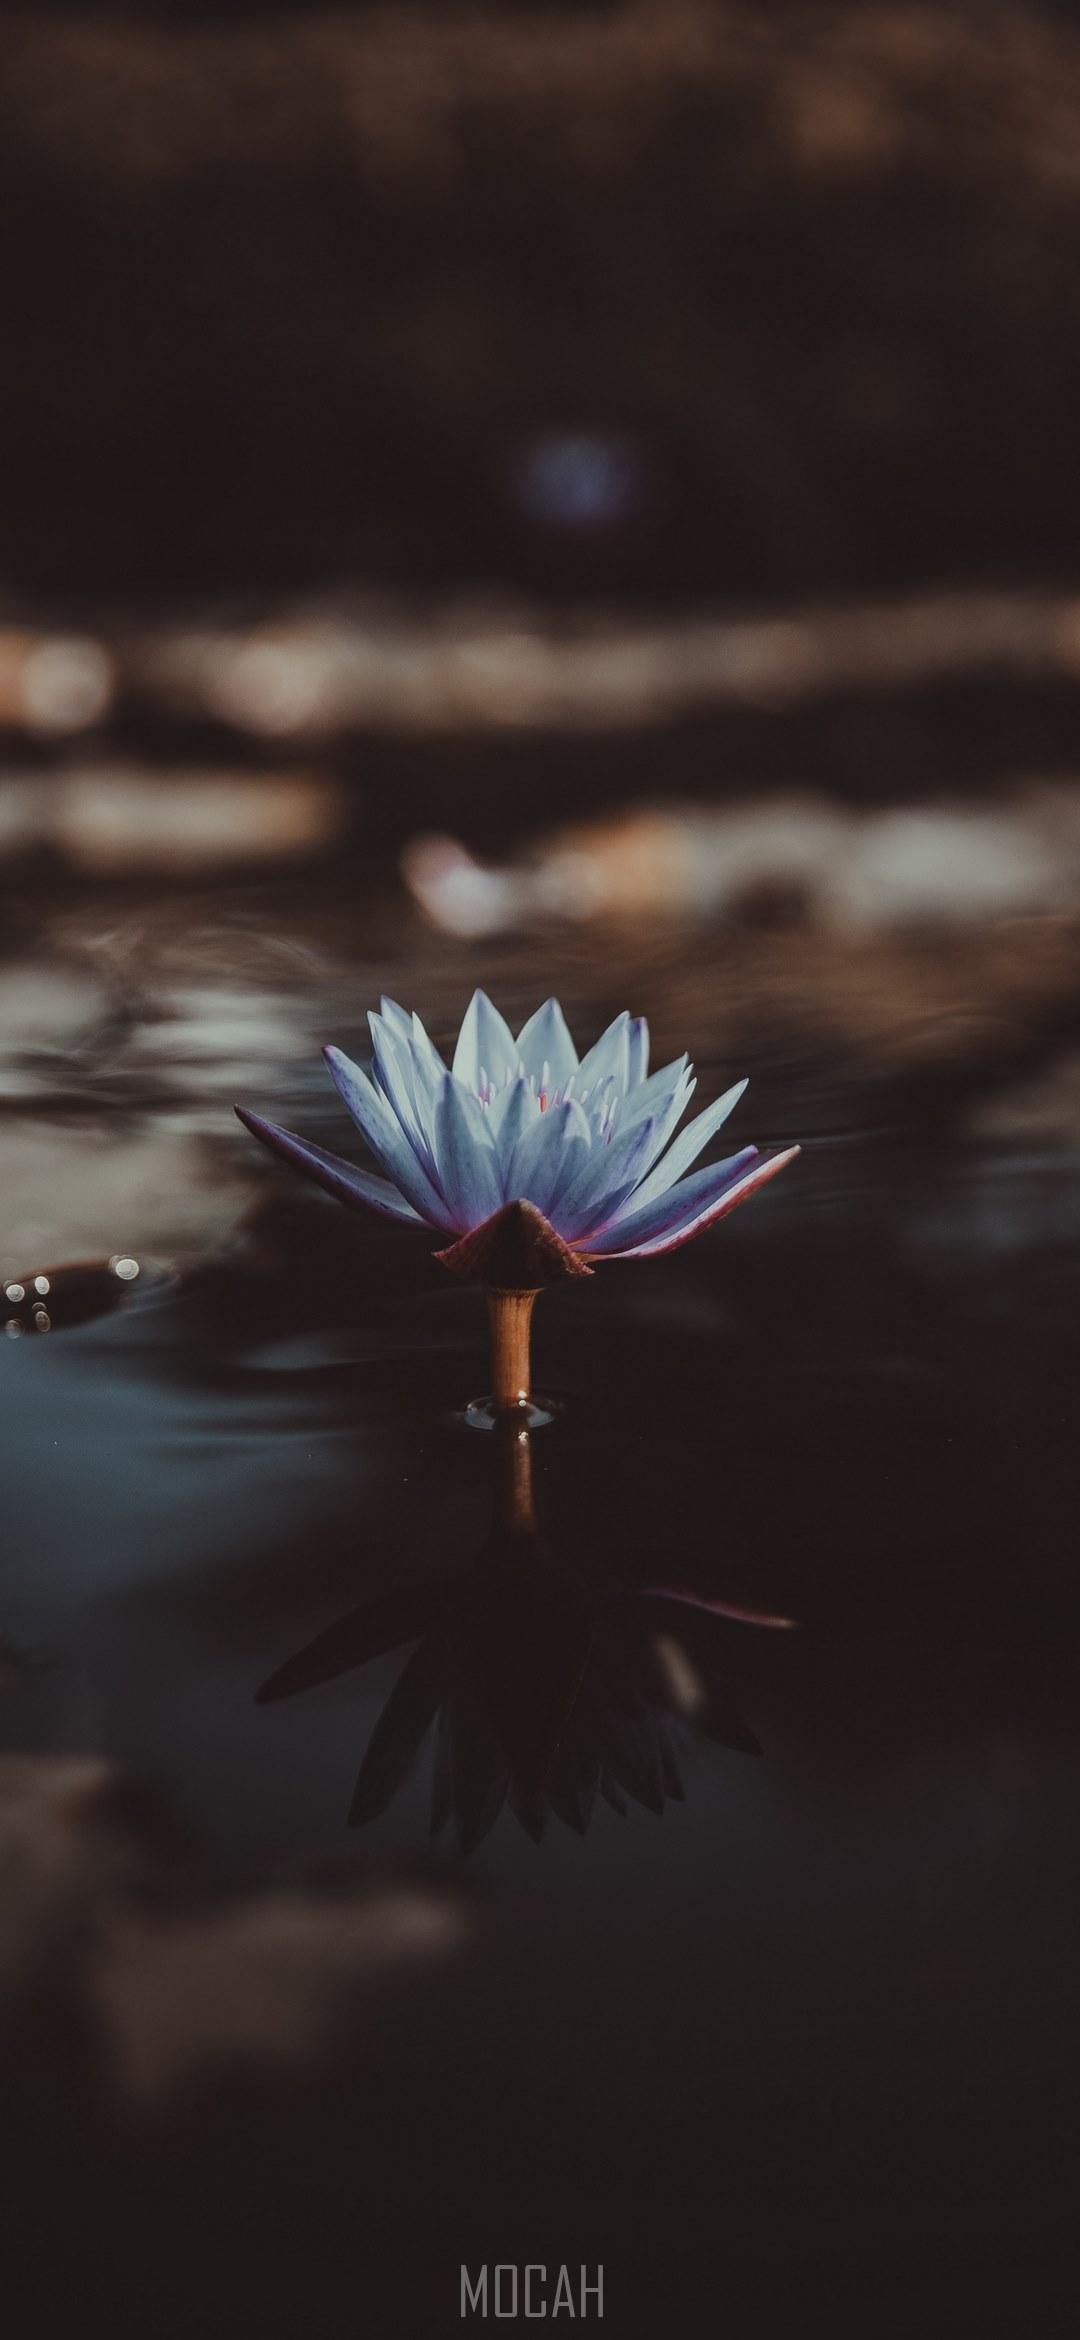 HD wallpaper, Oppo Find X Wallpaper Full Hd, A Light Violet Water Lily Jutting Out From The Surface Of Water, 1080X2340, Scared To Be Lonely